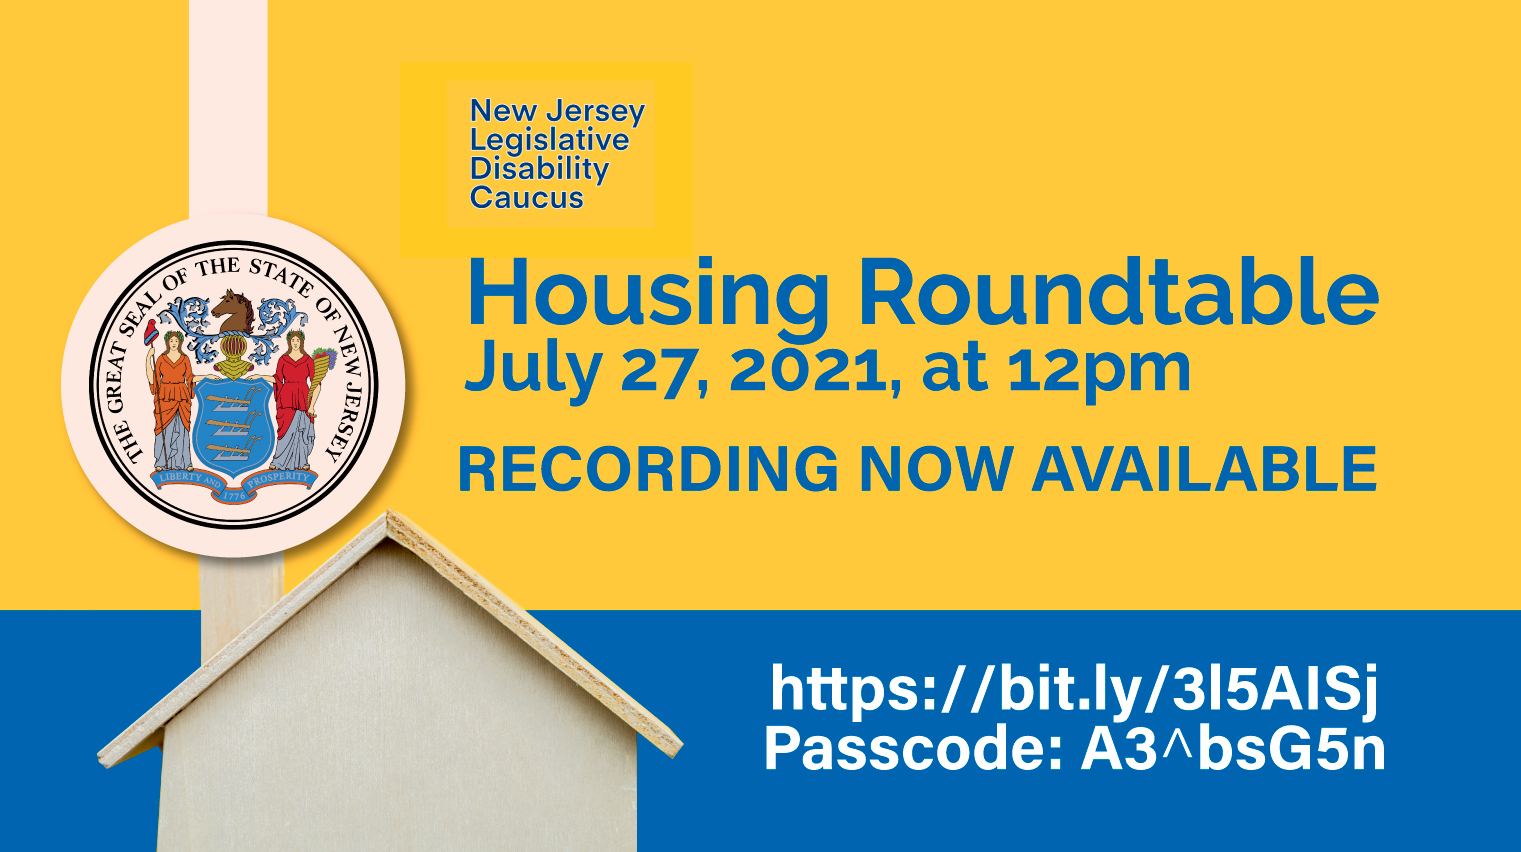 NJDisabilityCaucus-Housing-July272021-RecordingNowAvailable